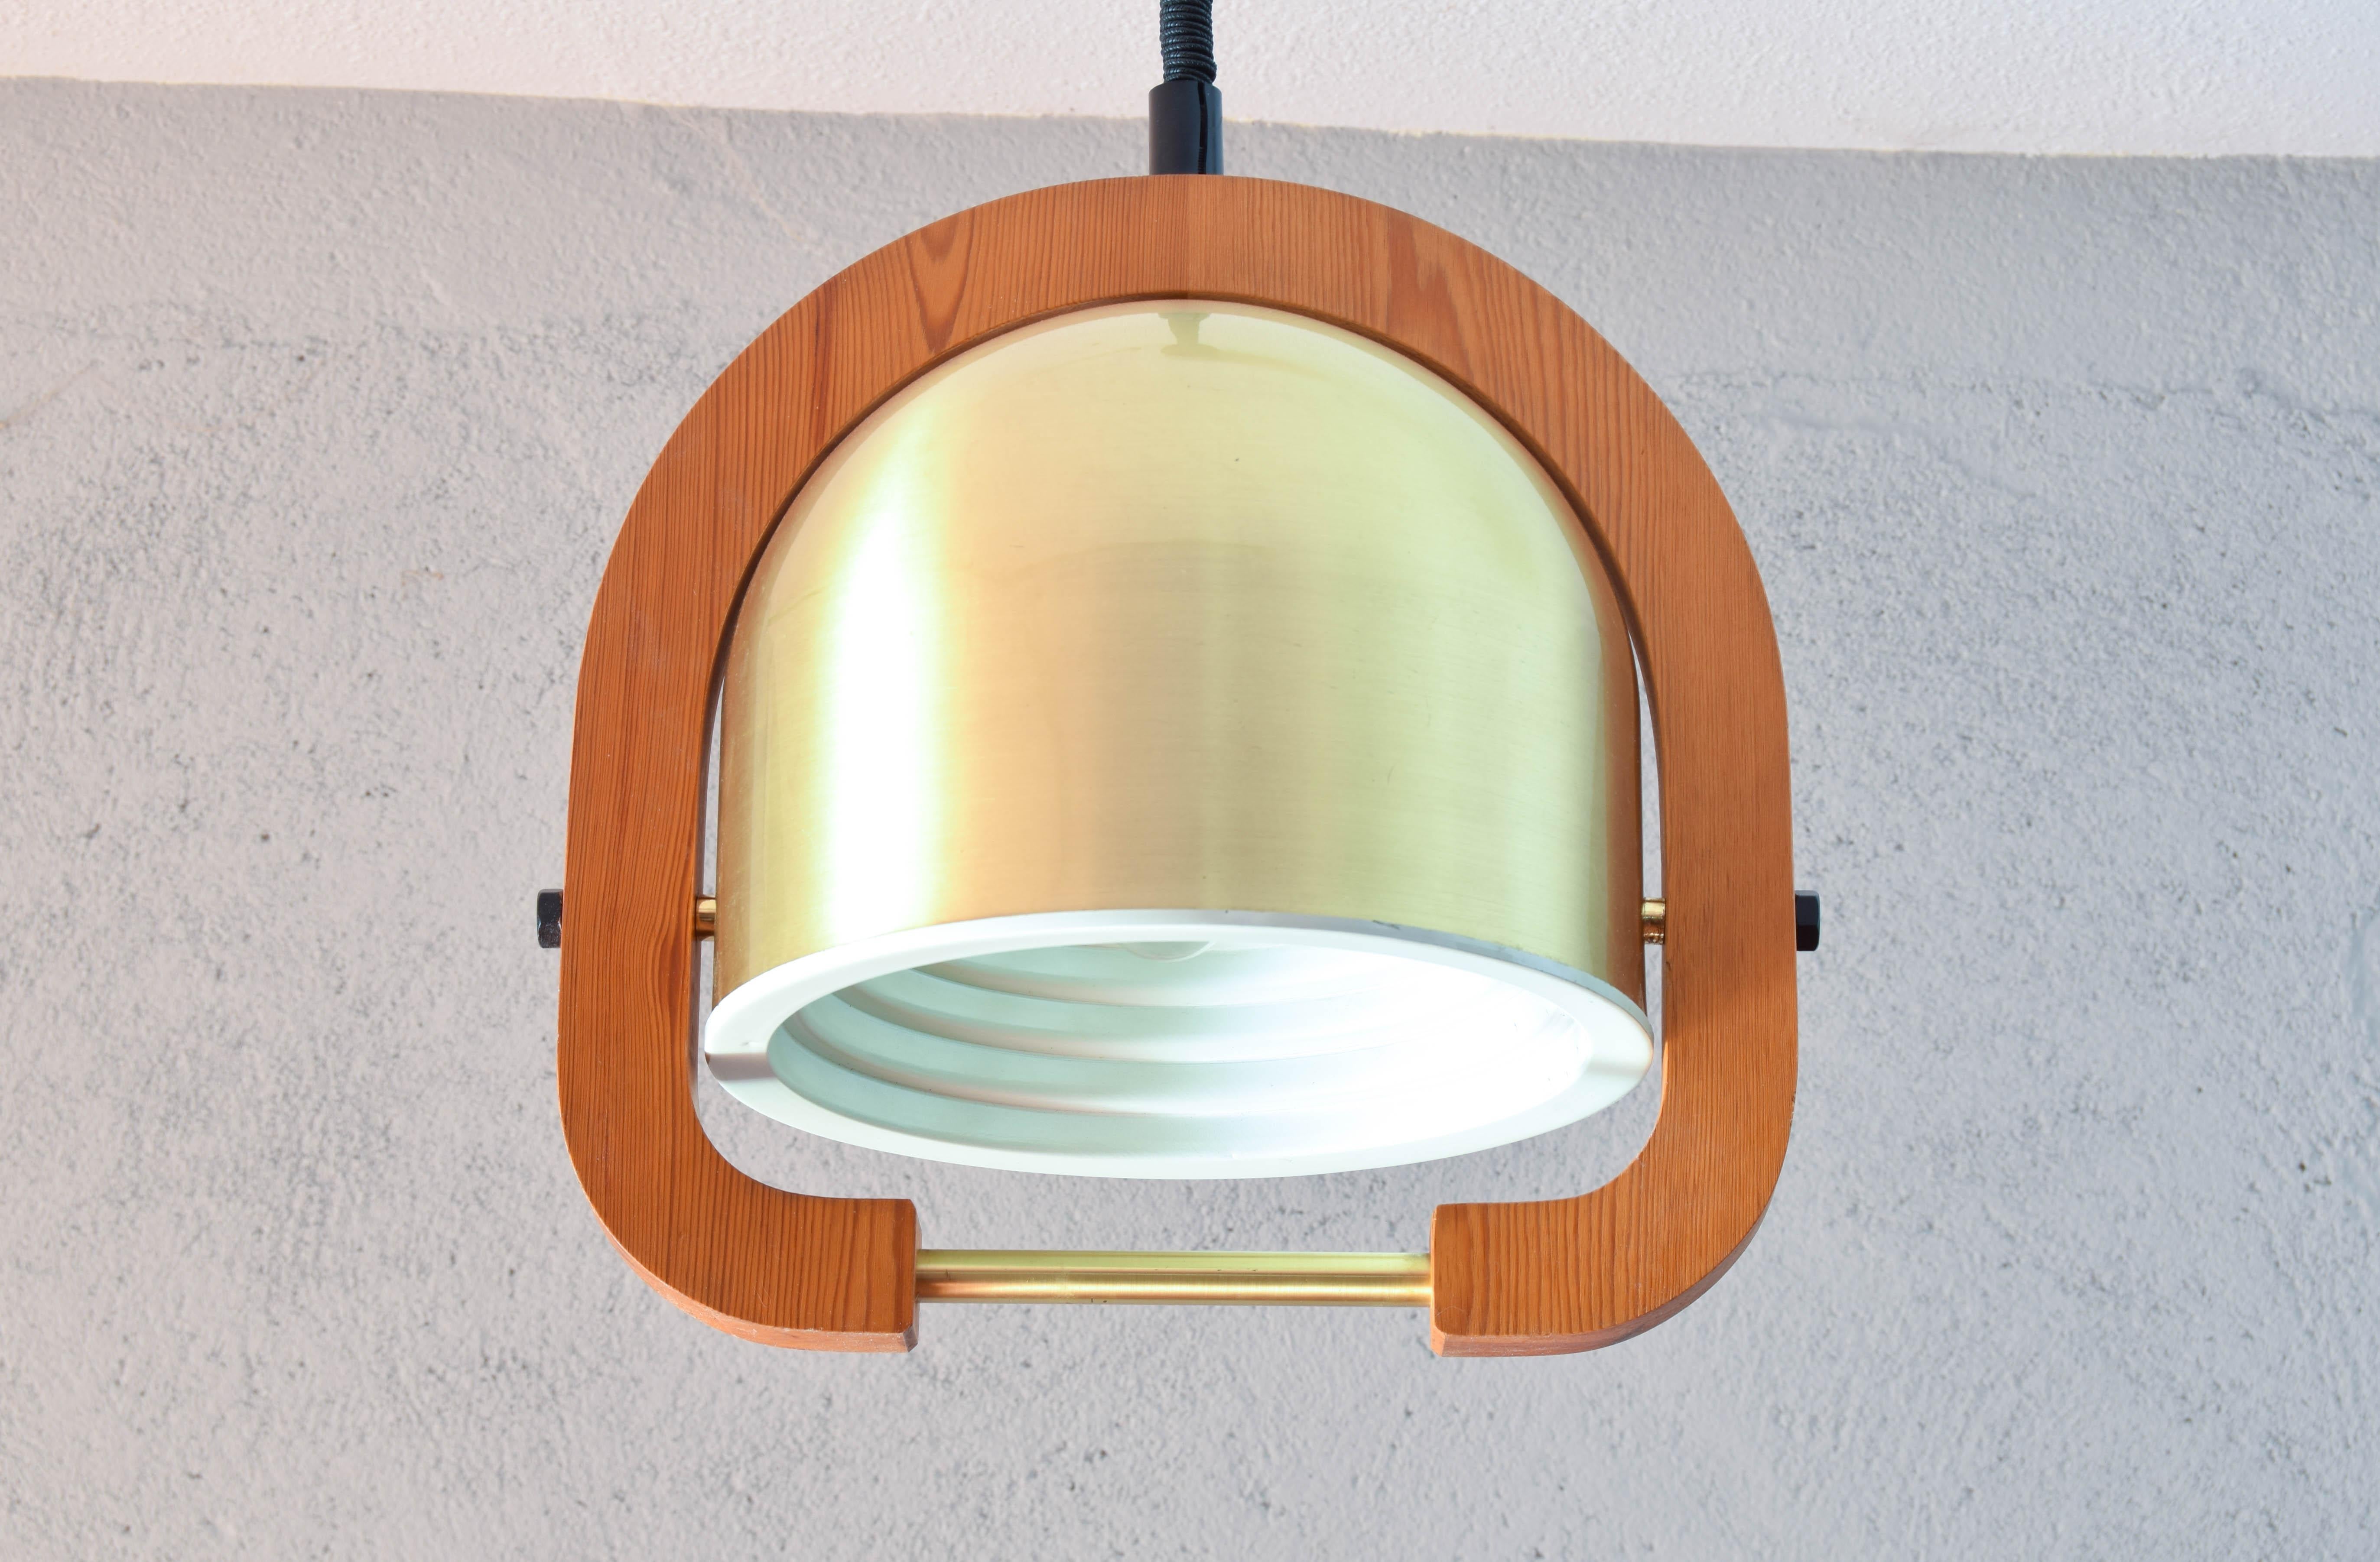 Beautiful height-adjustable hanging lamp.
Made in Italy in the 1970s, it is composed of a brass eye and an oak structure.
Italian modern style piece as beautiful as it is rare.
As can be seen in the images, it has some scratches but is in good